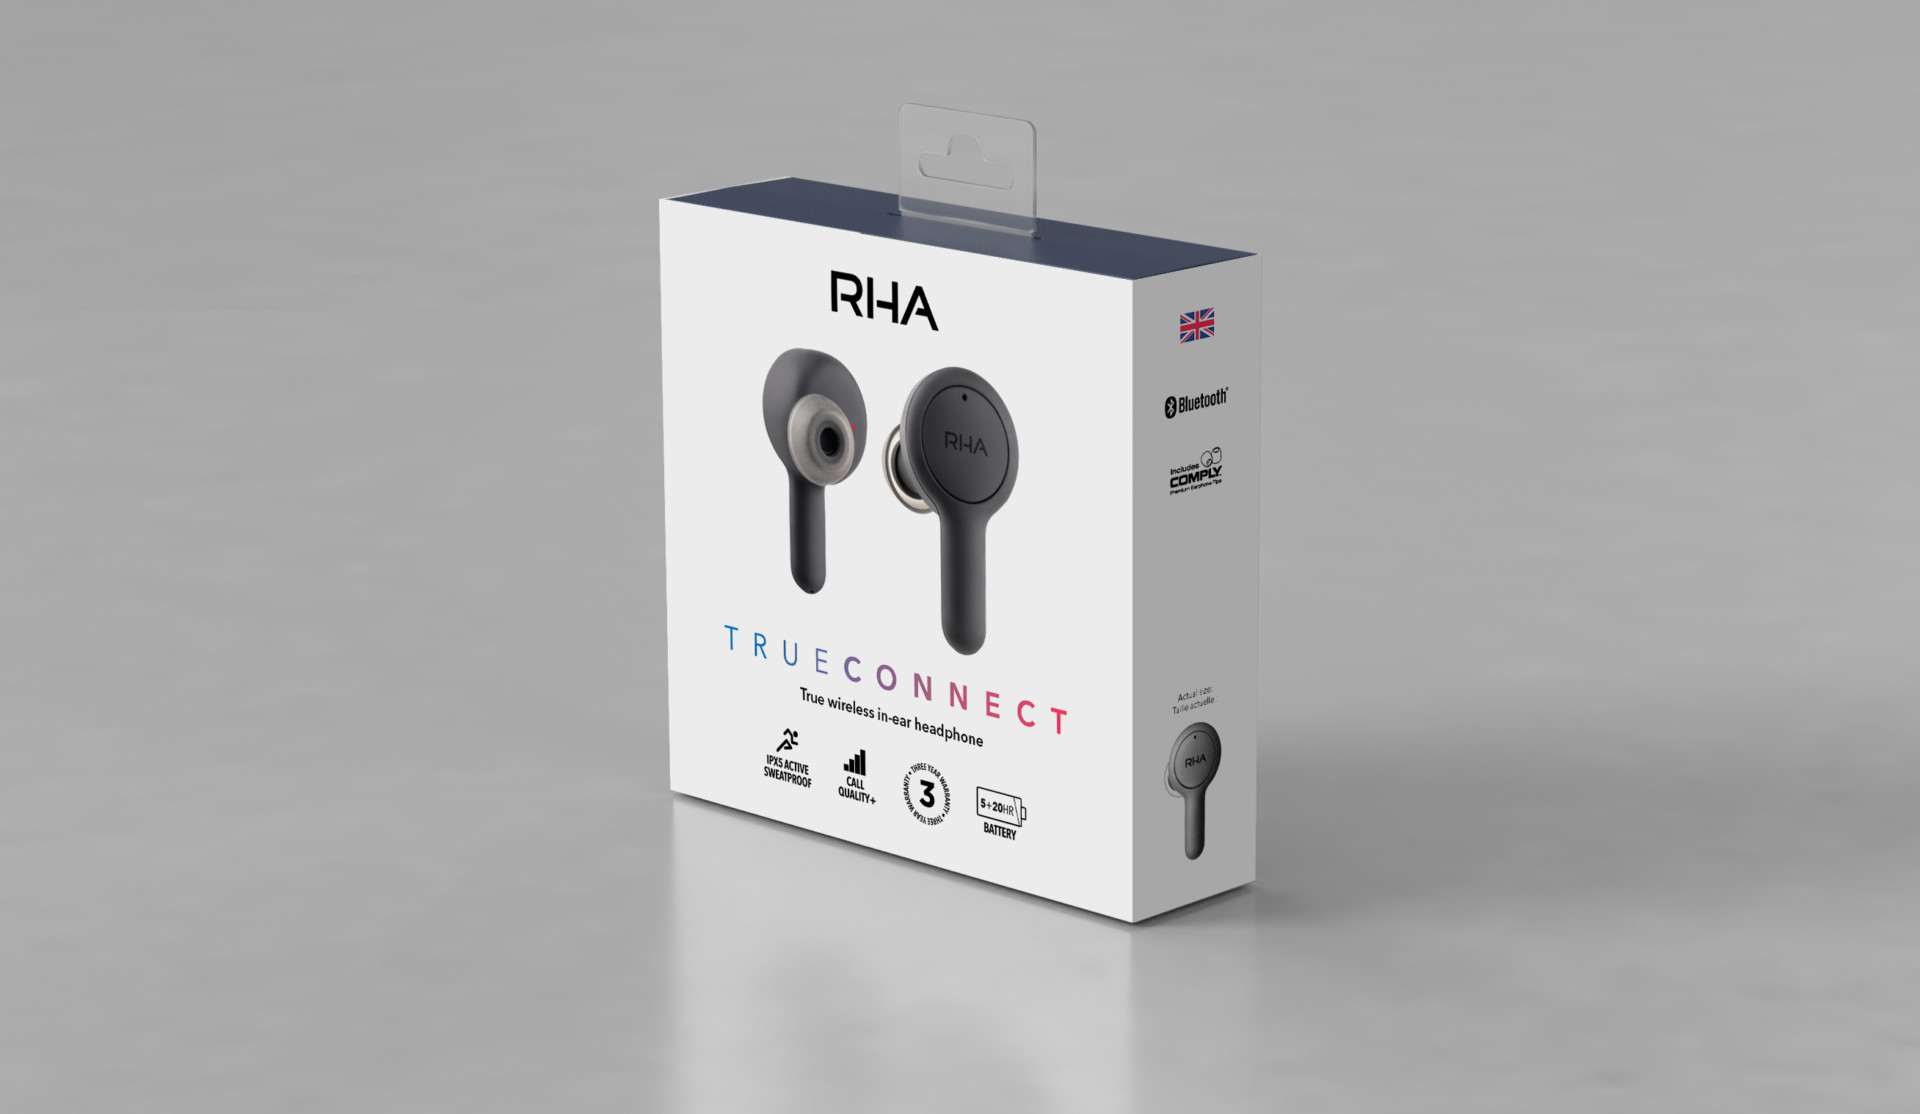 RHA TrueConnect: Image of the packaging on a grey background.